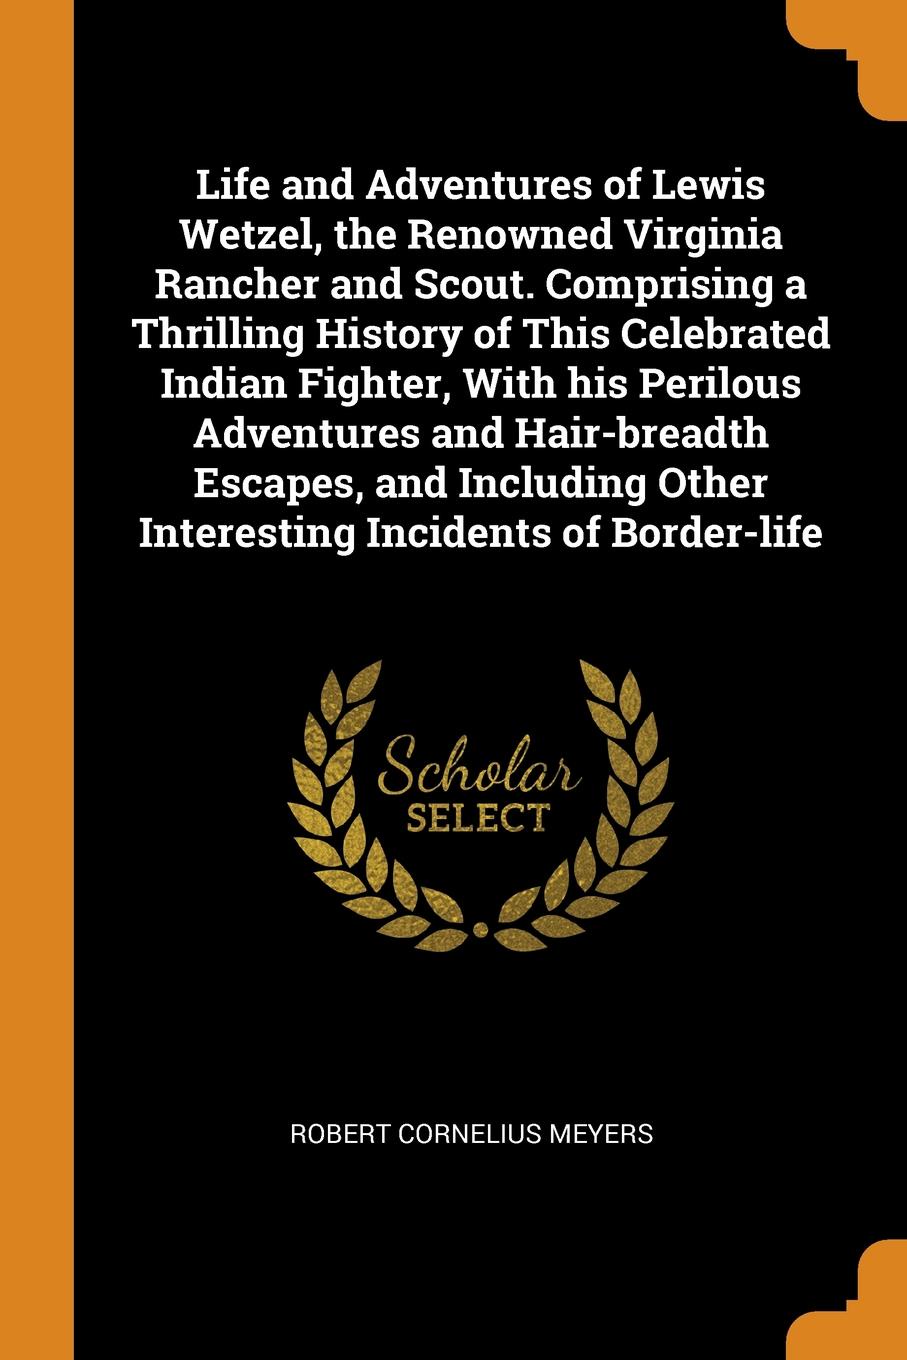 Life and Adventures of Lewis Wetzel, the Renowned Virginia Rancher and Scout. Comprising a Thrilling History of This Celebrated Indian Fighter, With his Perilous Adventures and Hair-breadth Escapes, and Including Other Interesting Incidents of Bor...